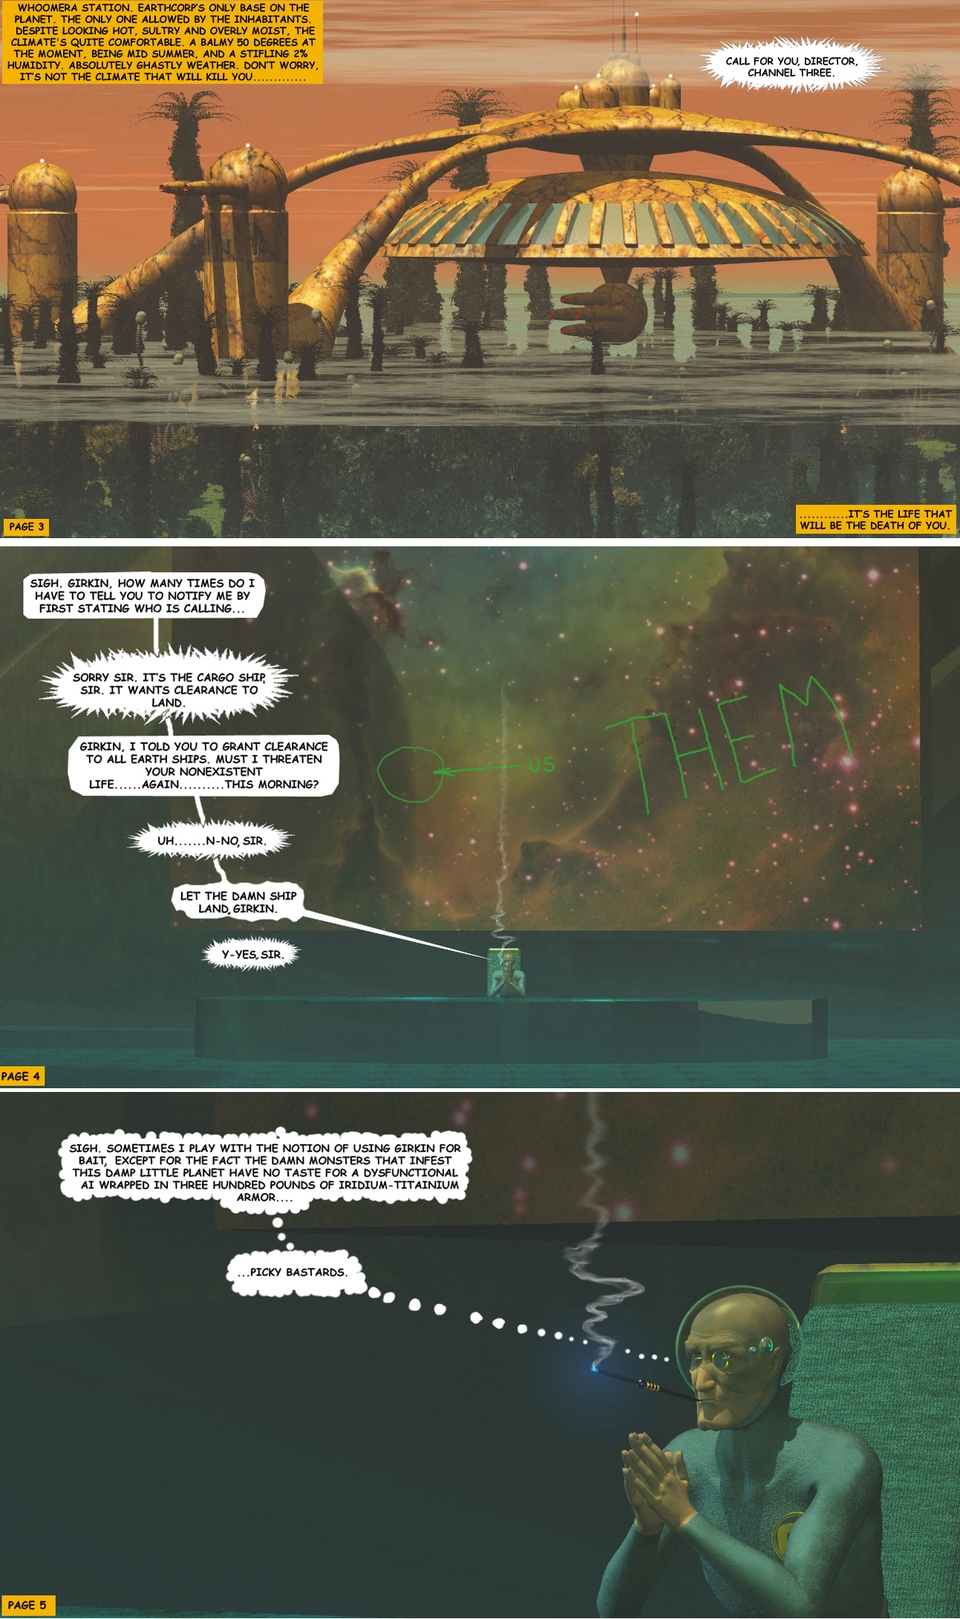 STORM OVER WHOOMERA: PAGE 2